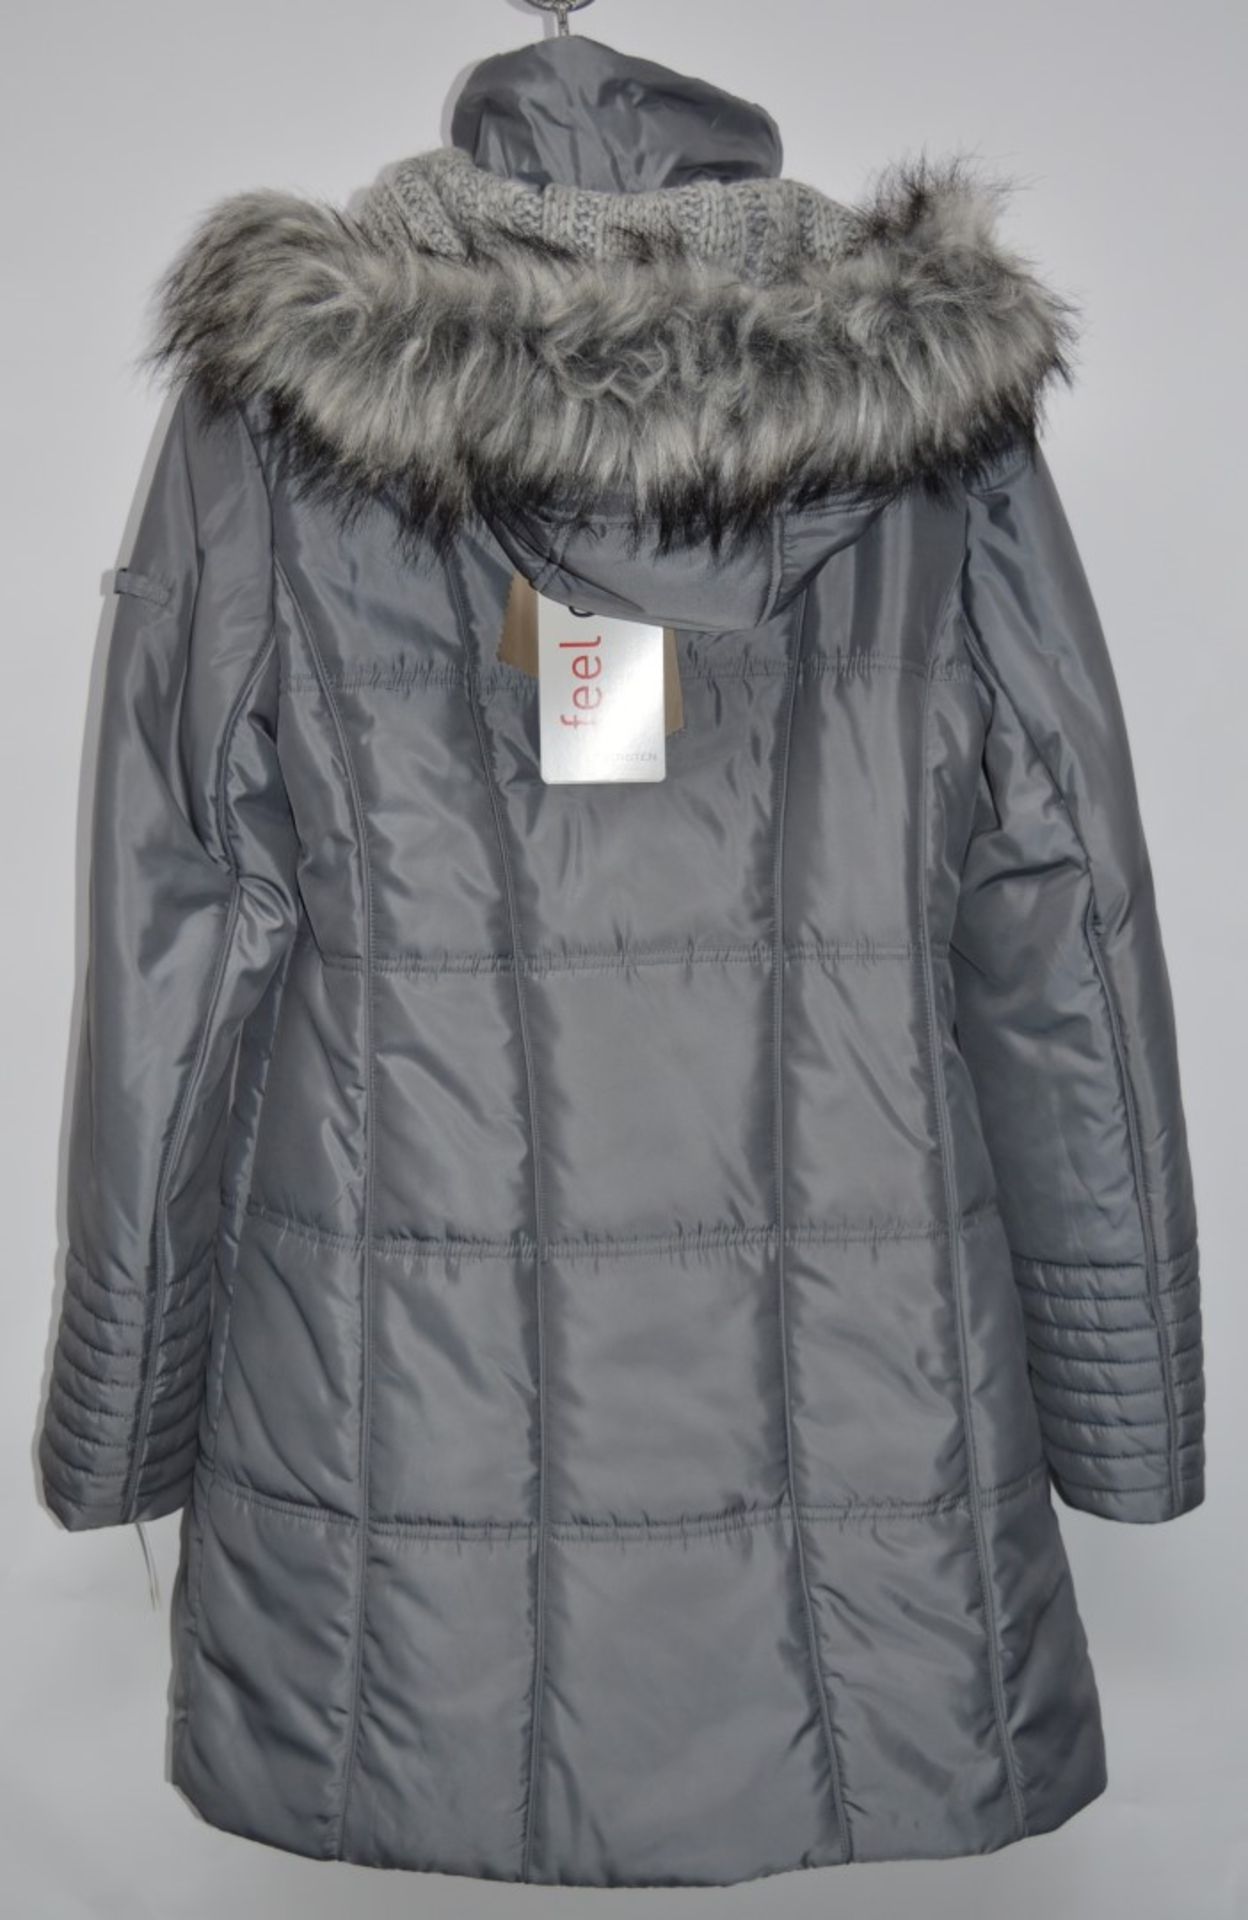 1 x Steilmann Kirsten Cover Womens Coat - Real Down Feather Filled Coat With Functional Pockets, - Image 2 of 13